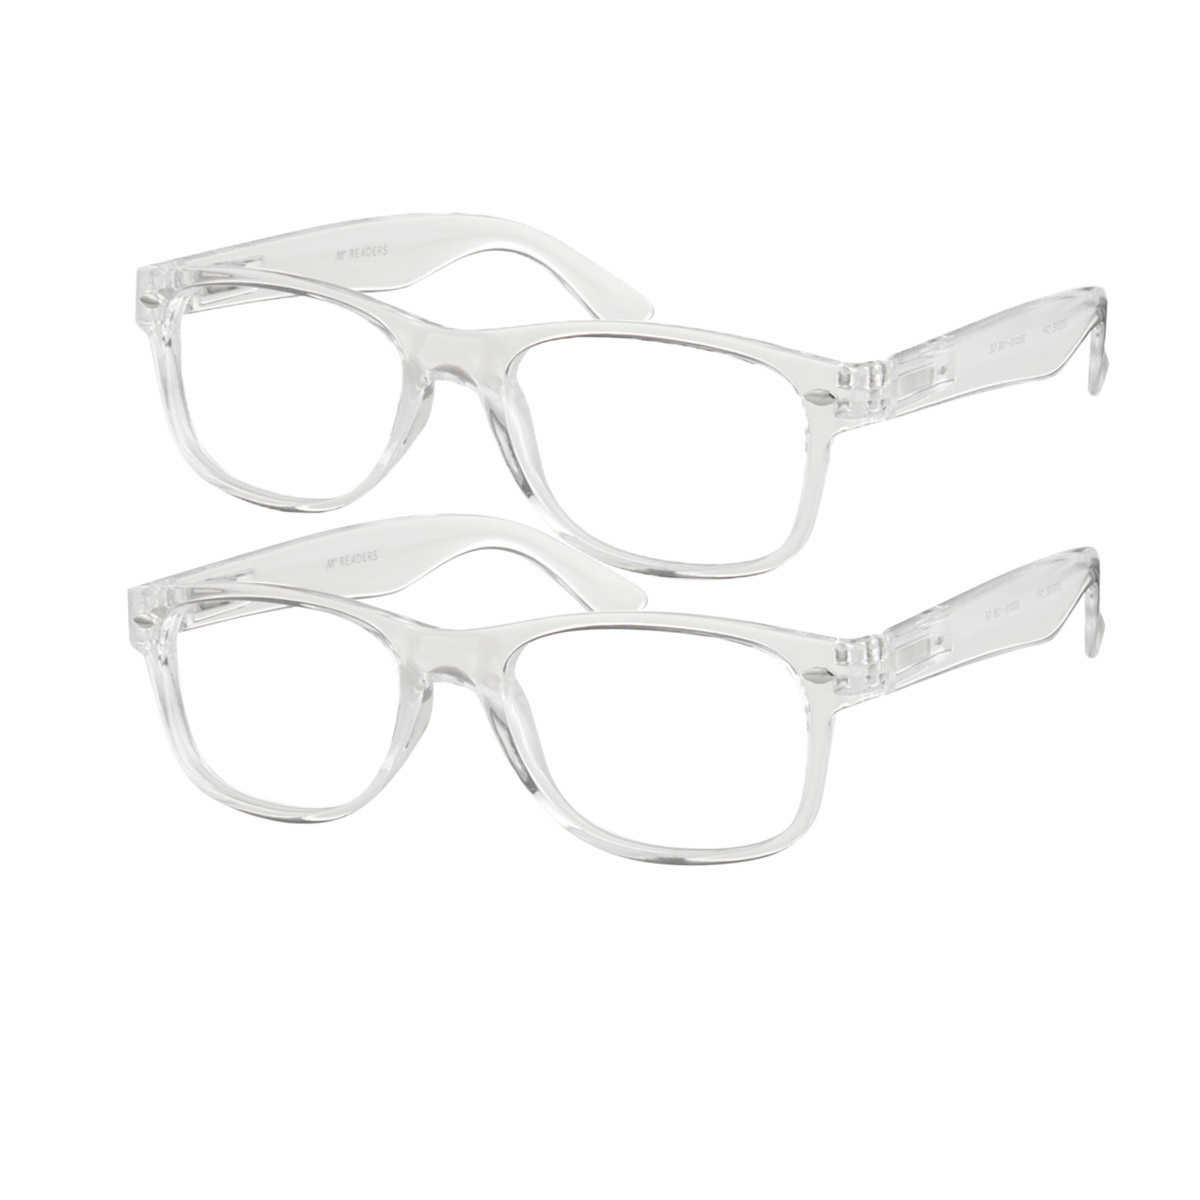 Owen by M+ Blue Light Protection Reading Glasses, 2-pack